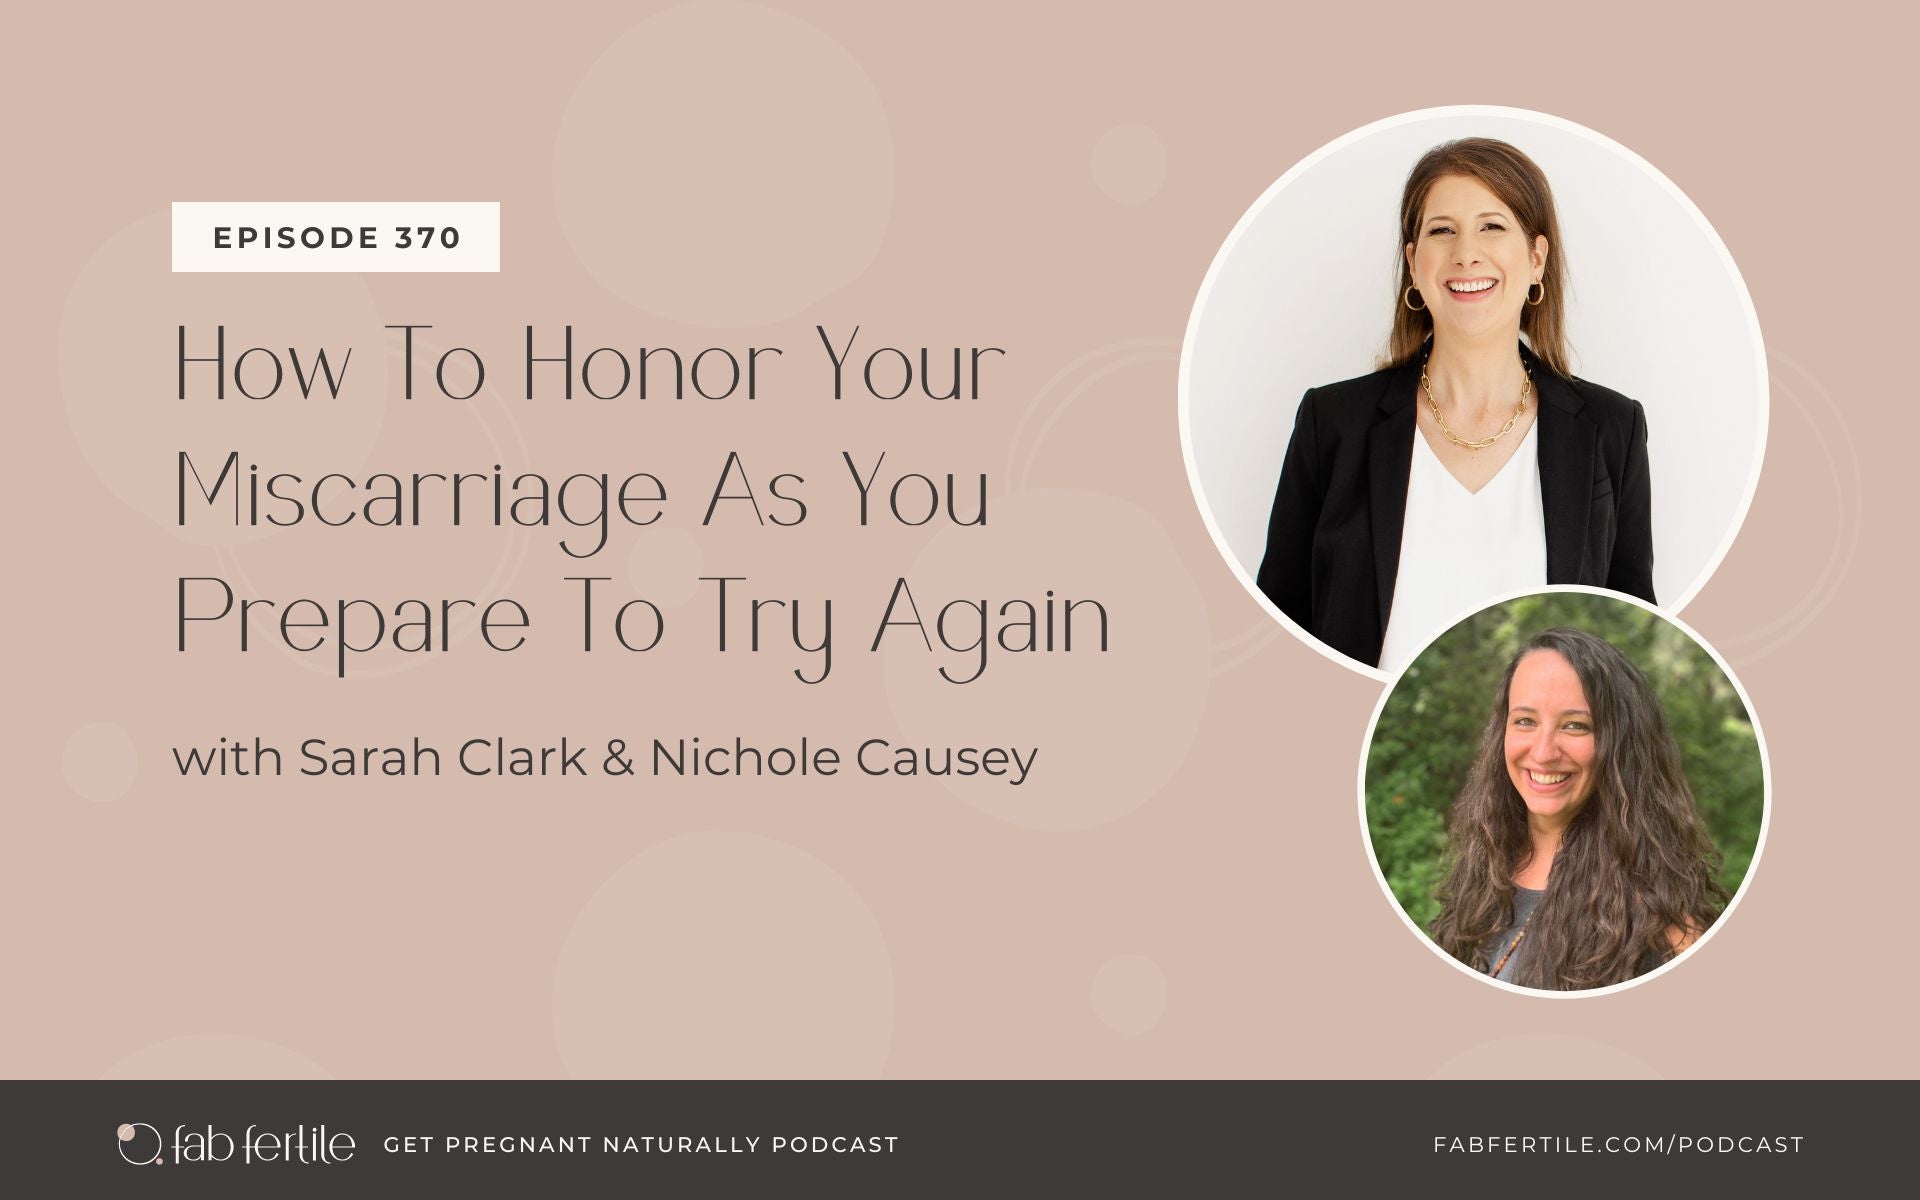 How To Honor Your Miscarriage As You Prepare To Try Again To Conceive with Nichole Causey